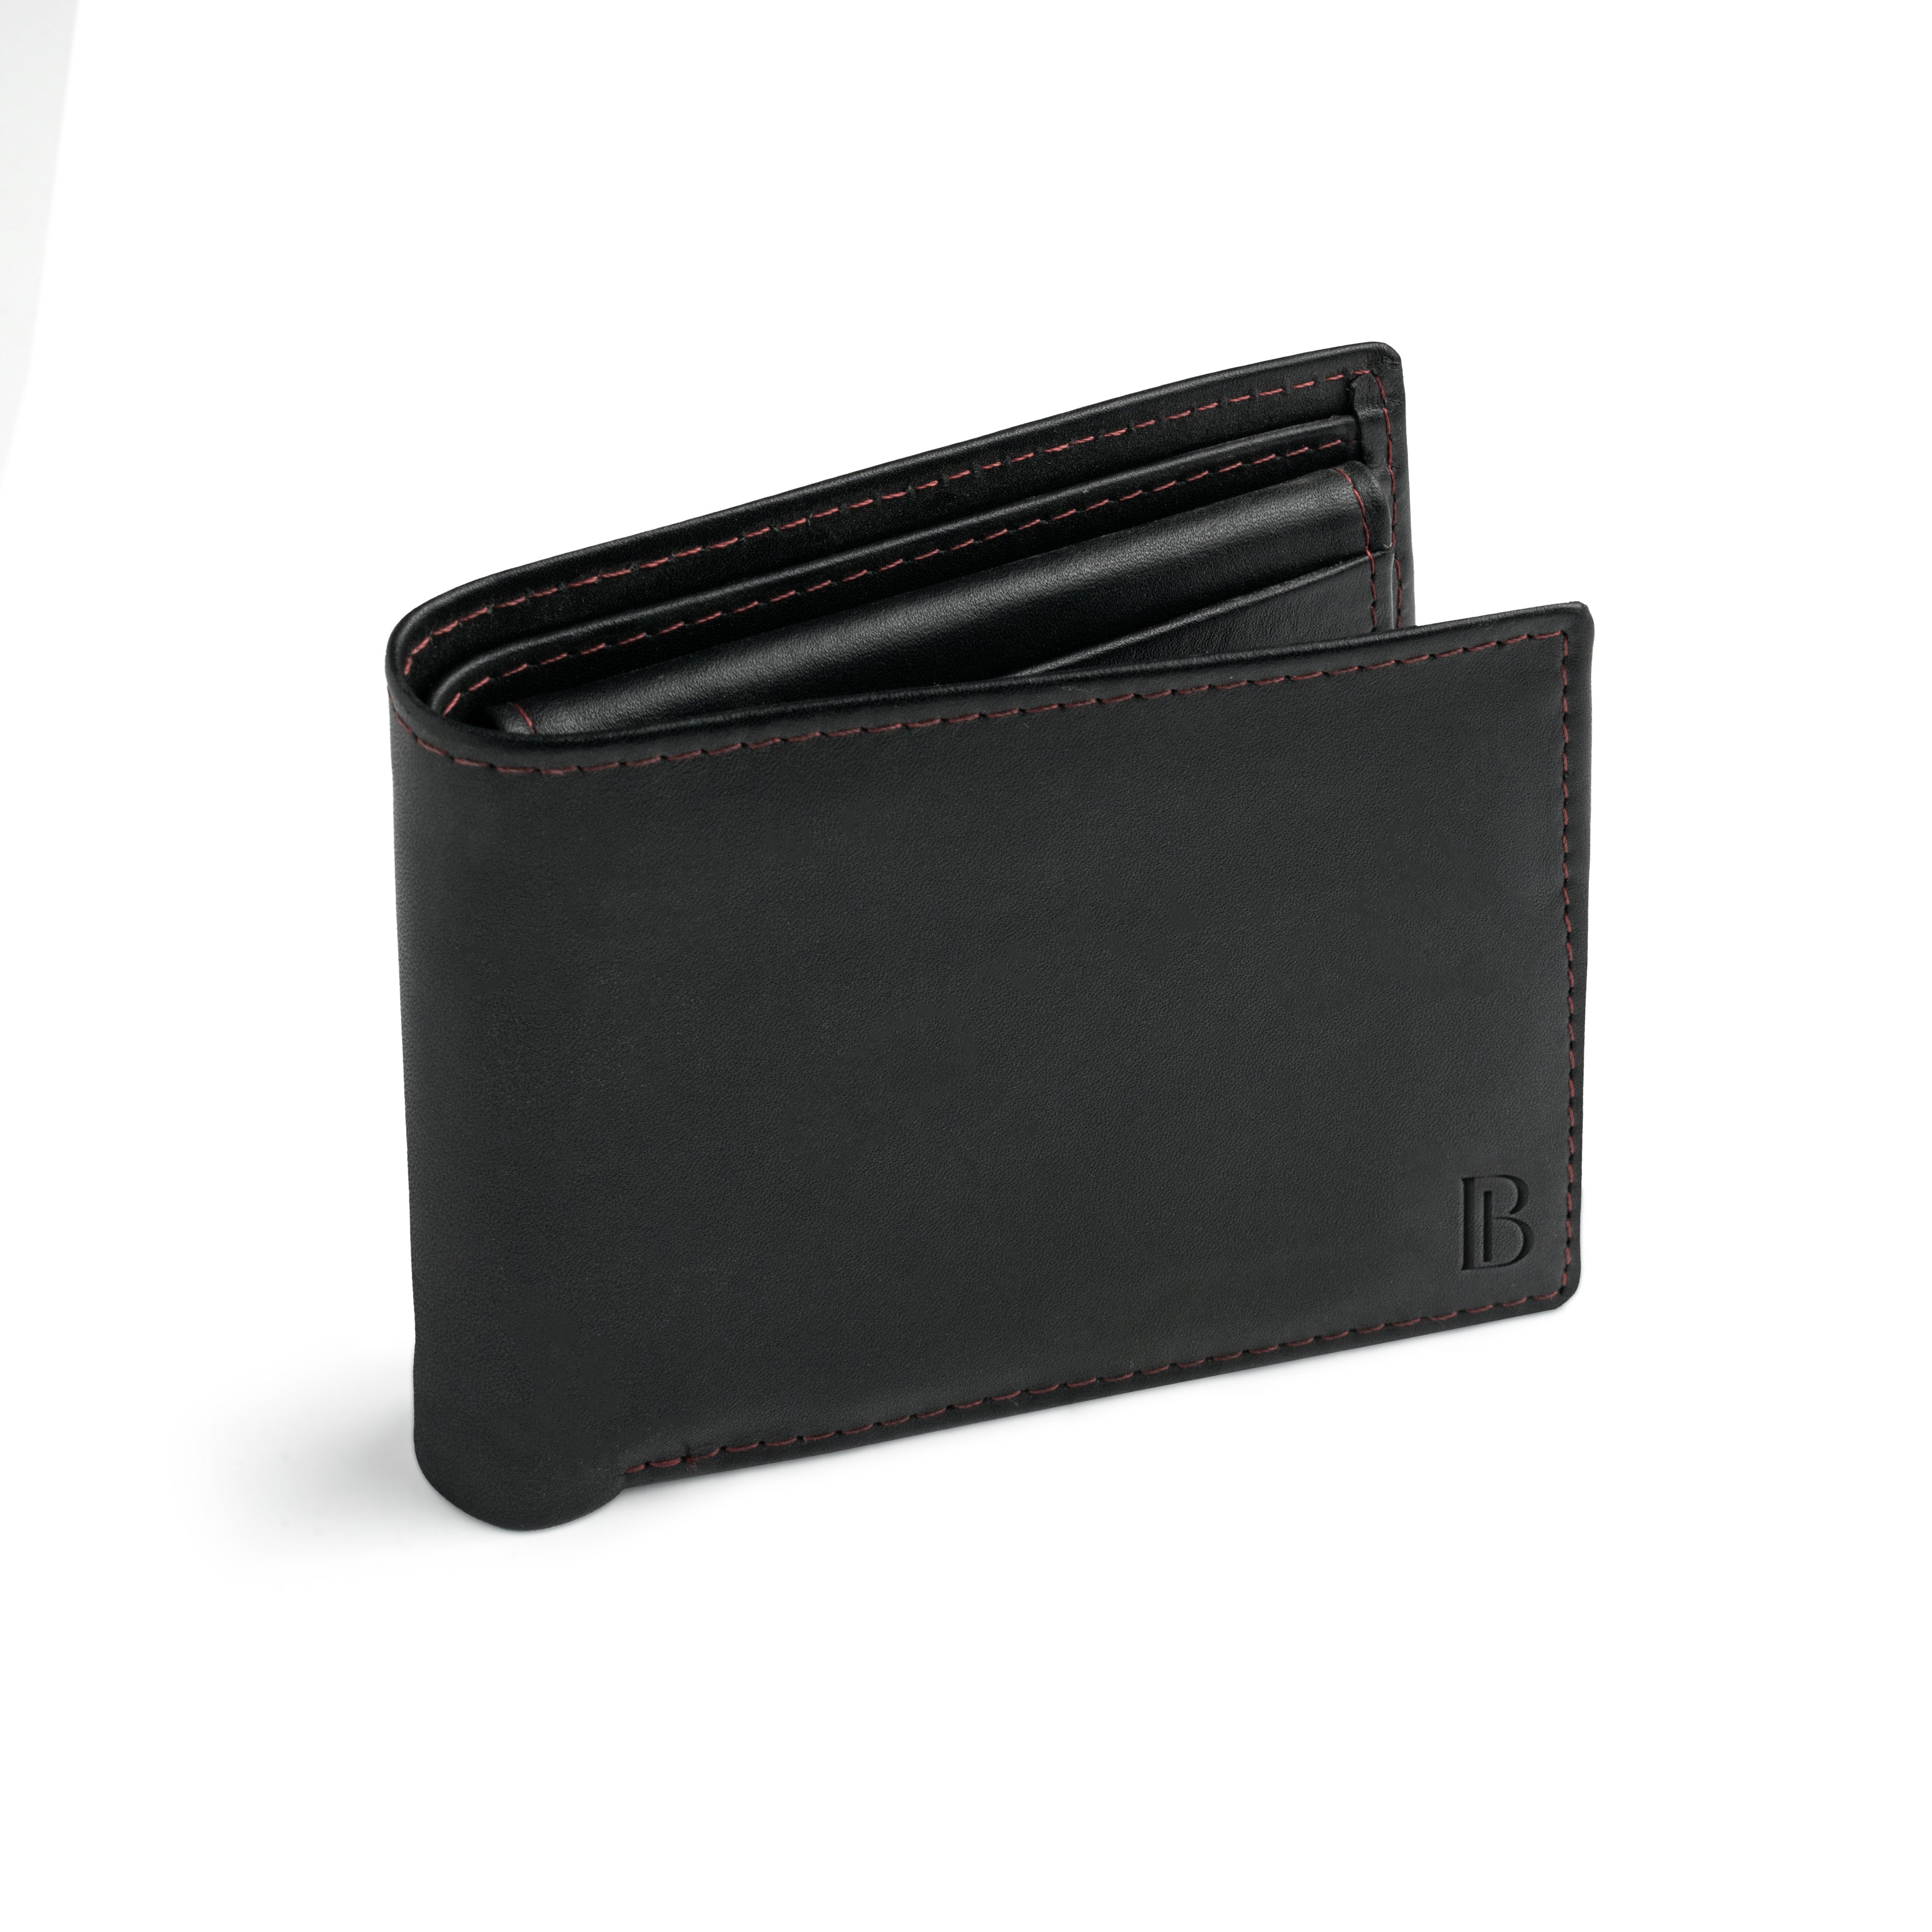 JJ Black Leather Bifold Wallet with Contrasting Stitch